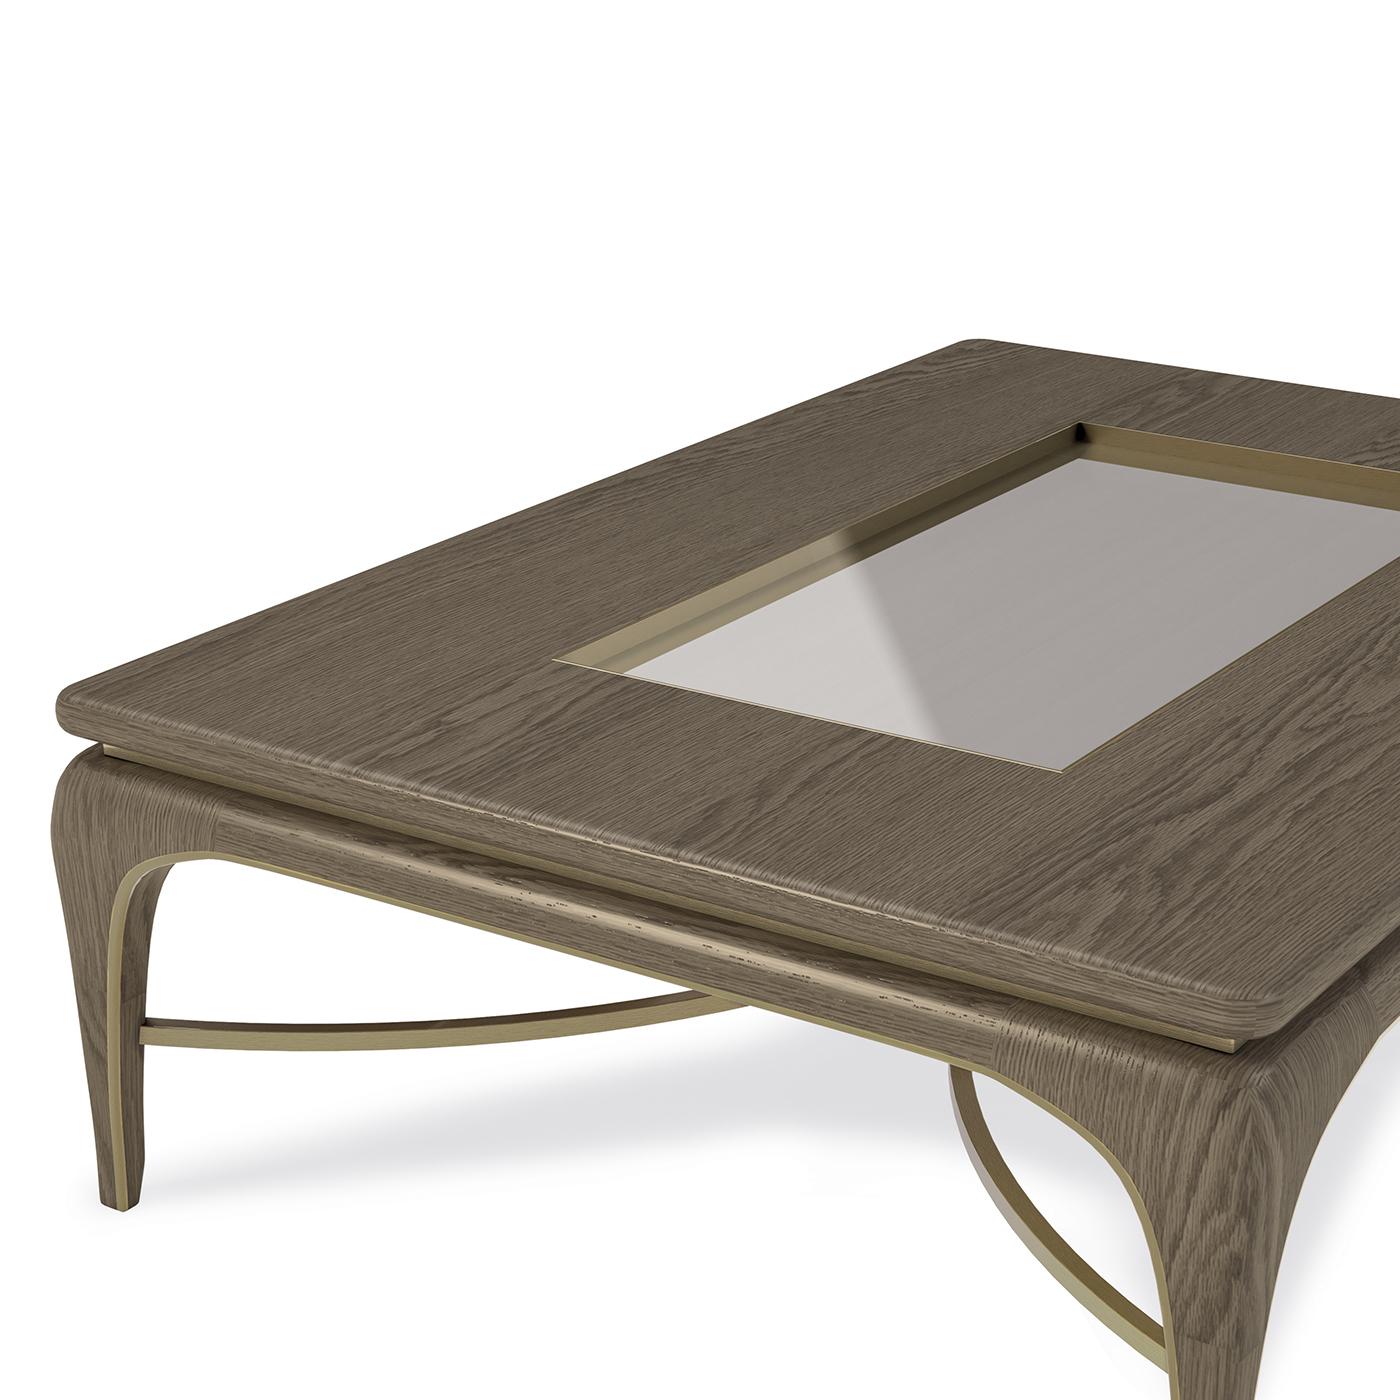 Unique and elegant, this rectangular coffee table is exquisitely crafted with meticulous attention to detail. The structure is made of veneered plywood, while the frame and base are in solid wood and are enriched with a burnished brass profile